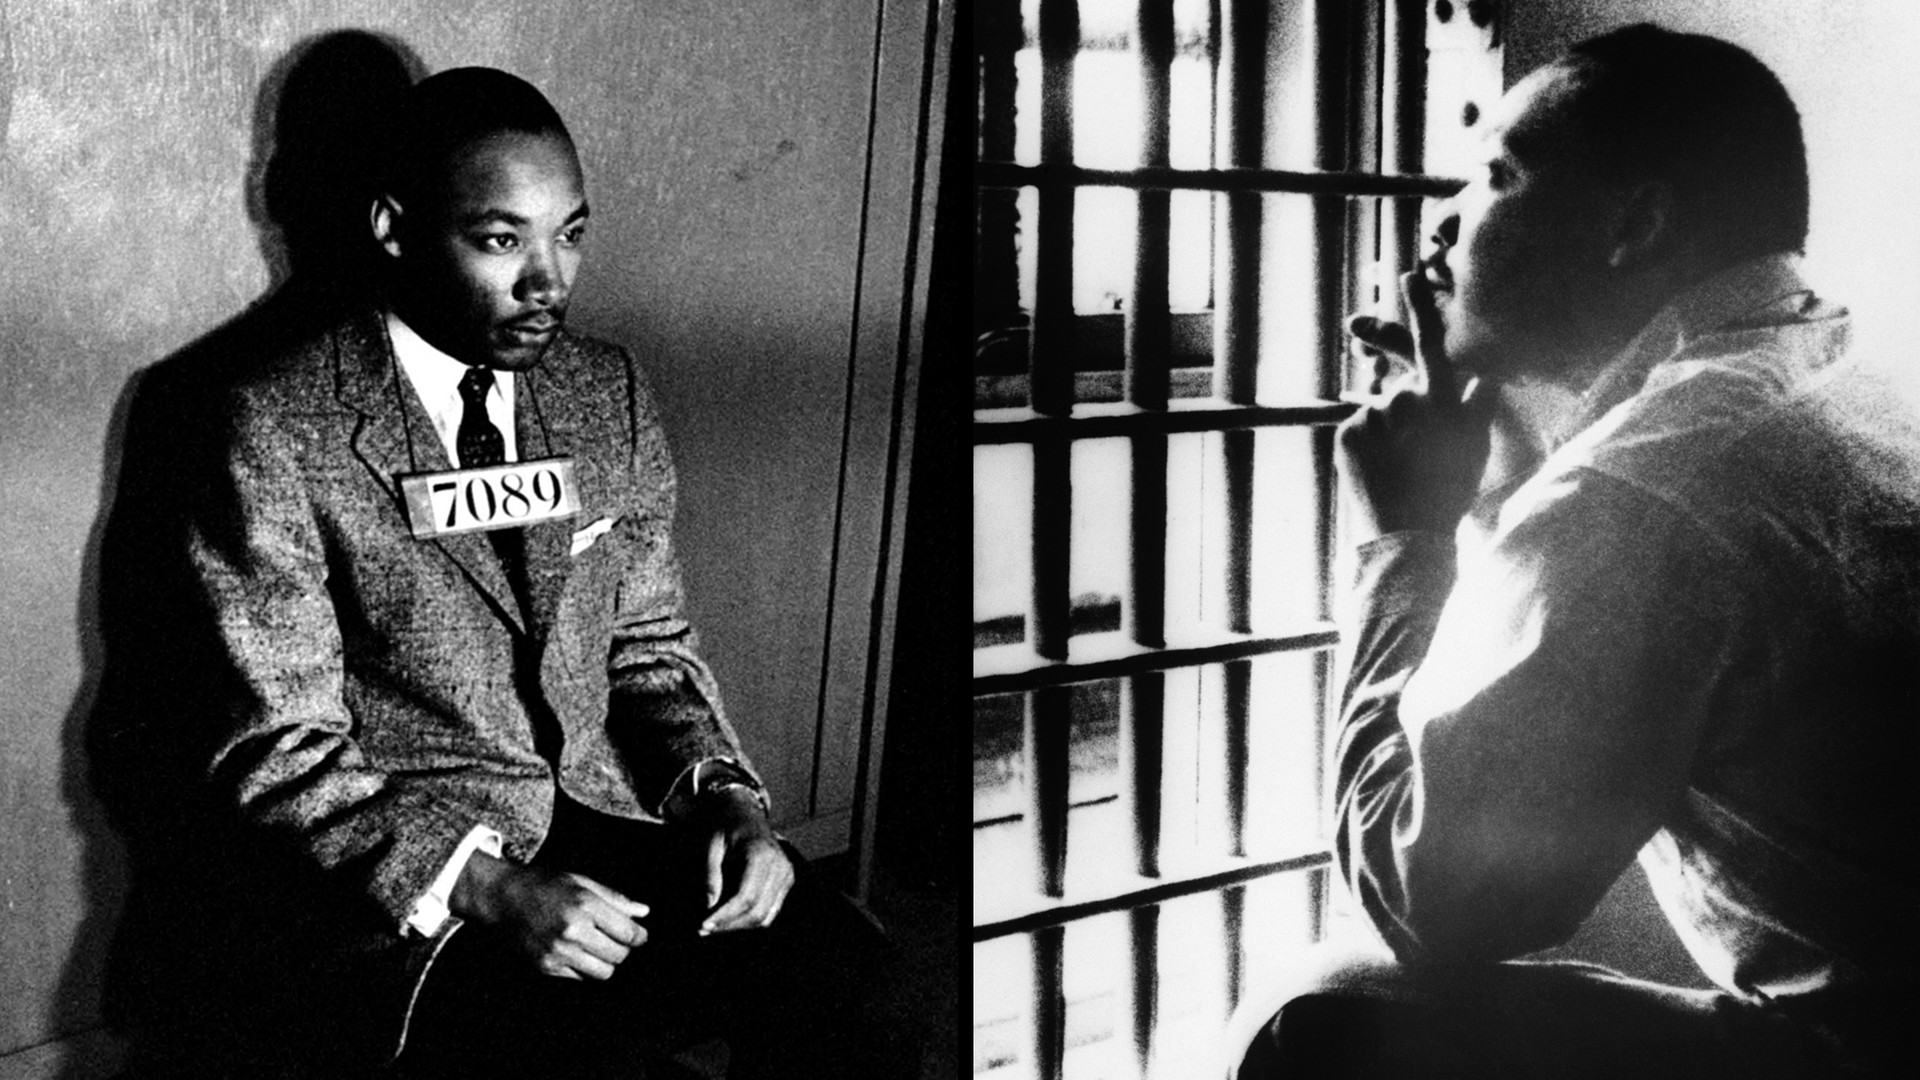 Eric Patterson on Martin Luther King Jr’s Measured, People-Power Approach to Protest